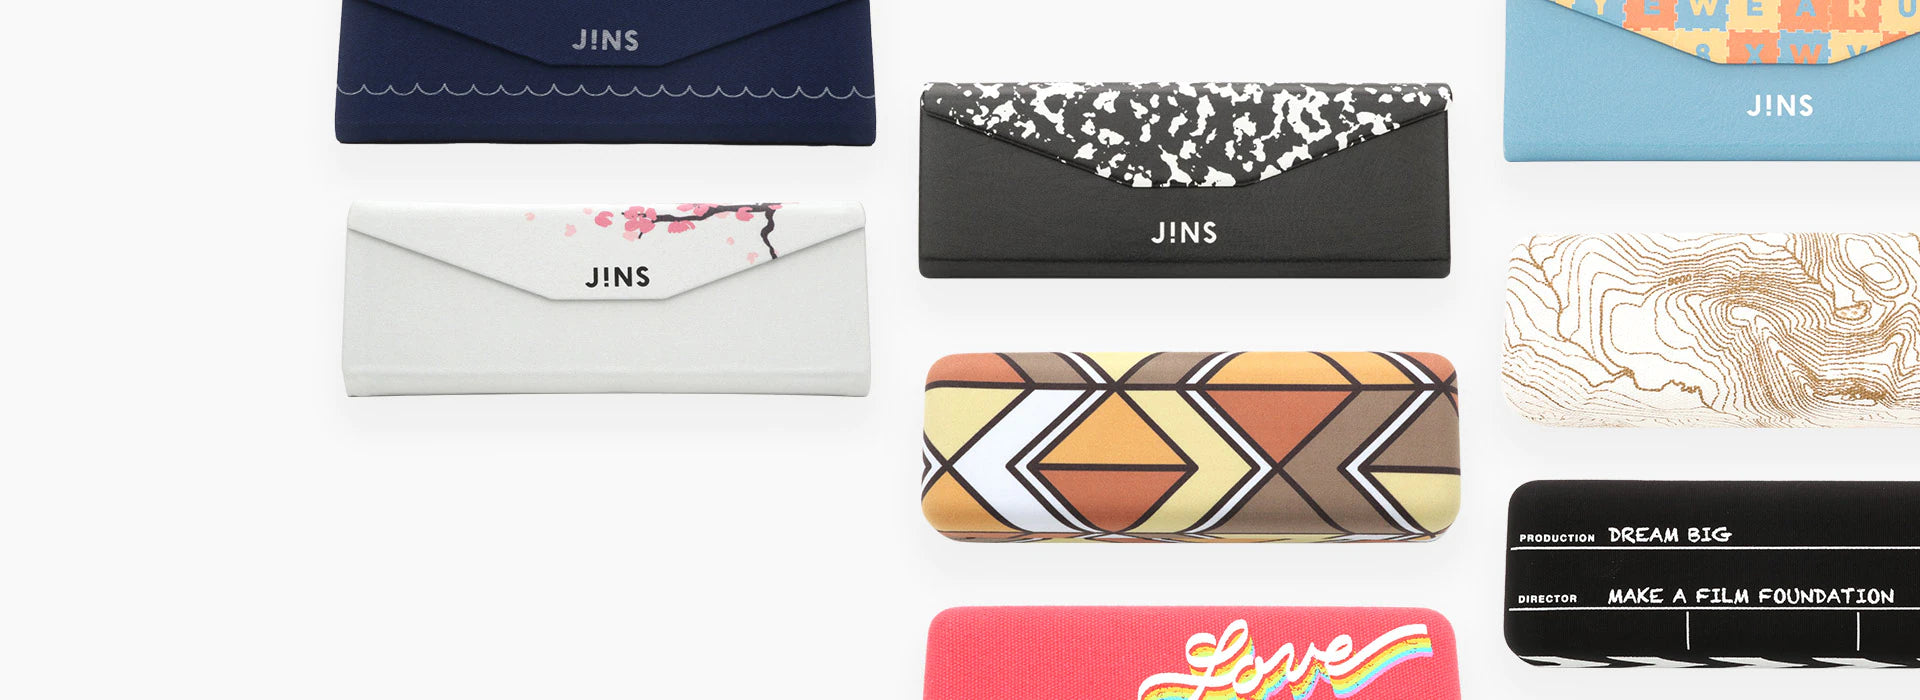 JINS Cases For Causes